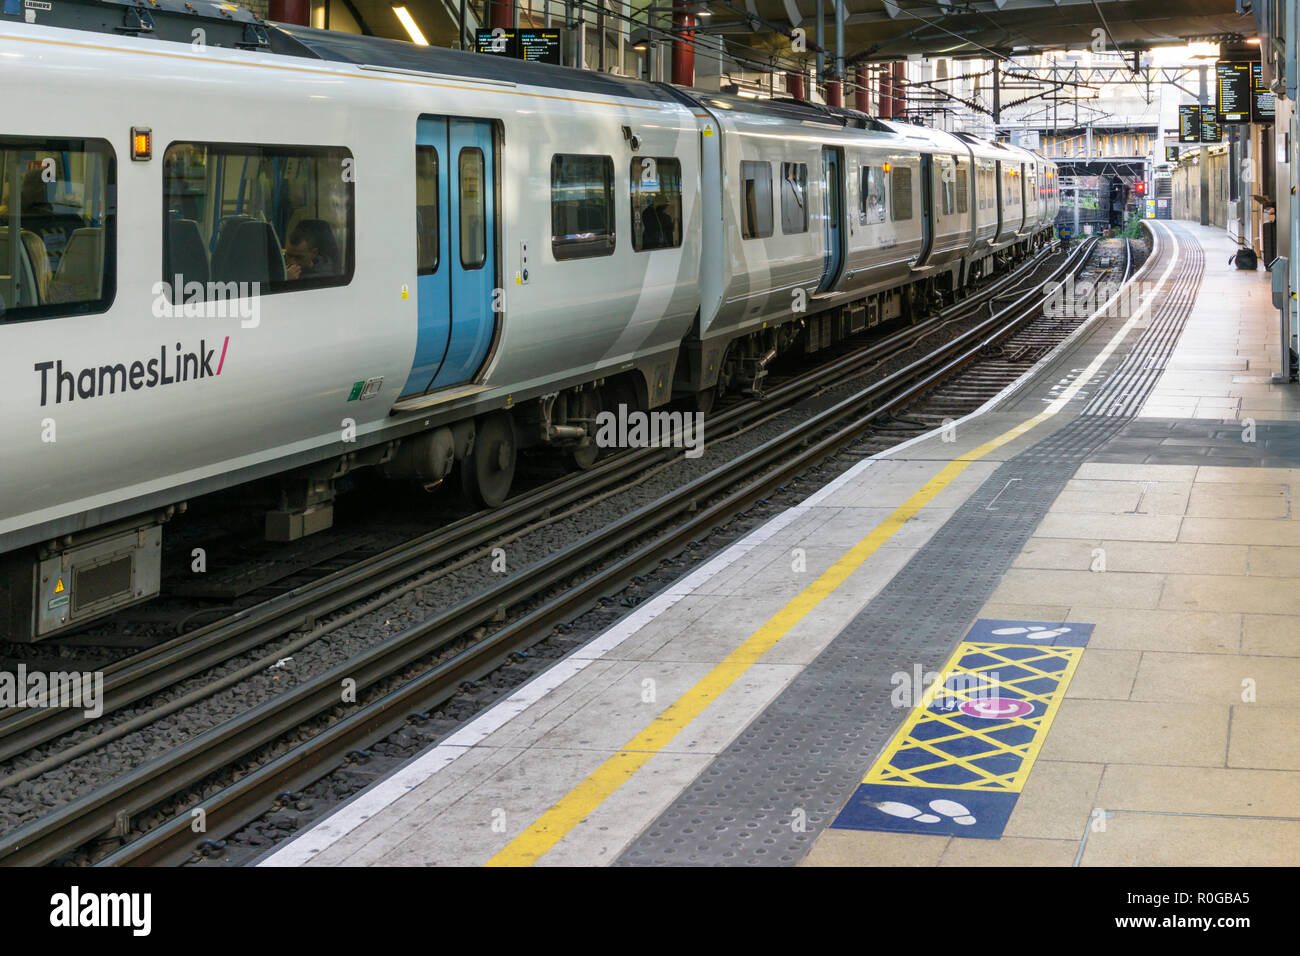 A northbound Thameslink train passing through Farringdon Station in Central London. Stock Photo